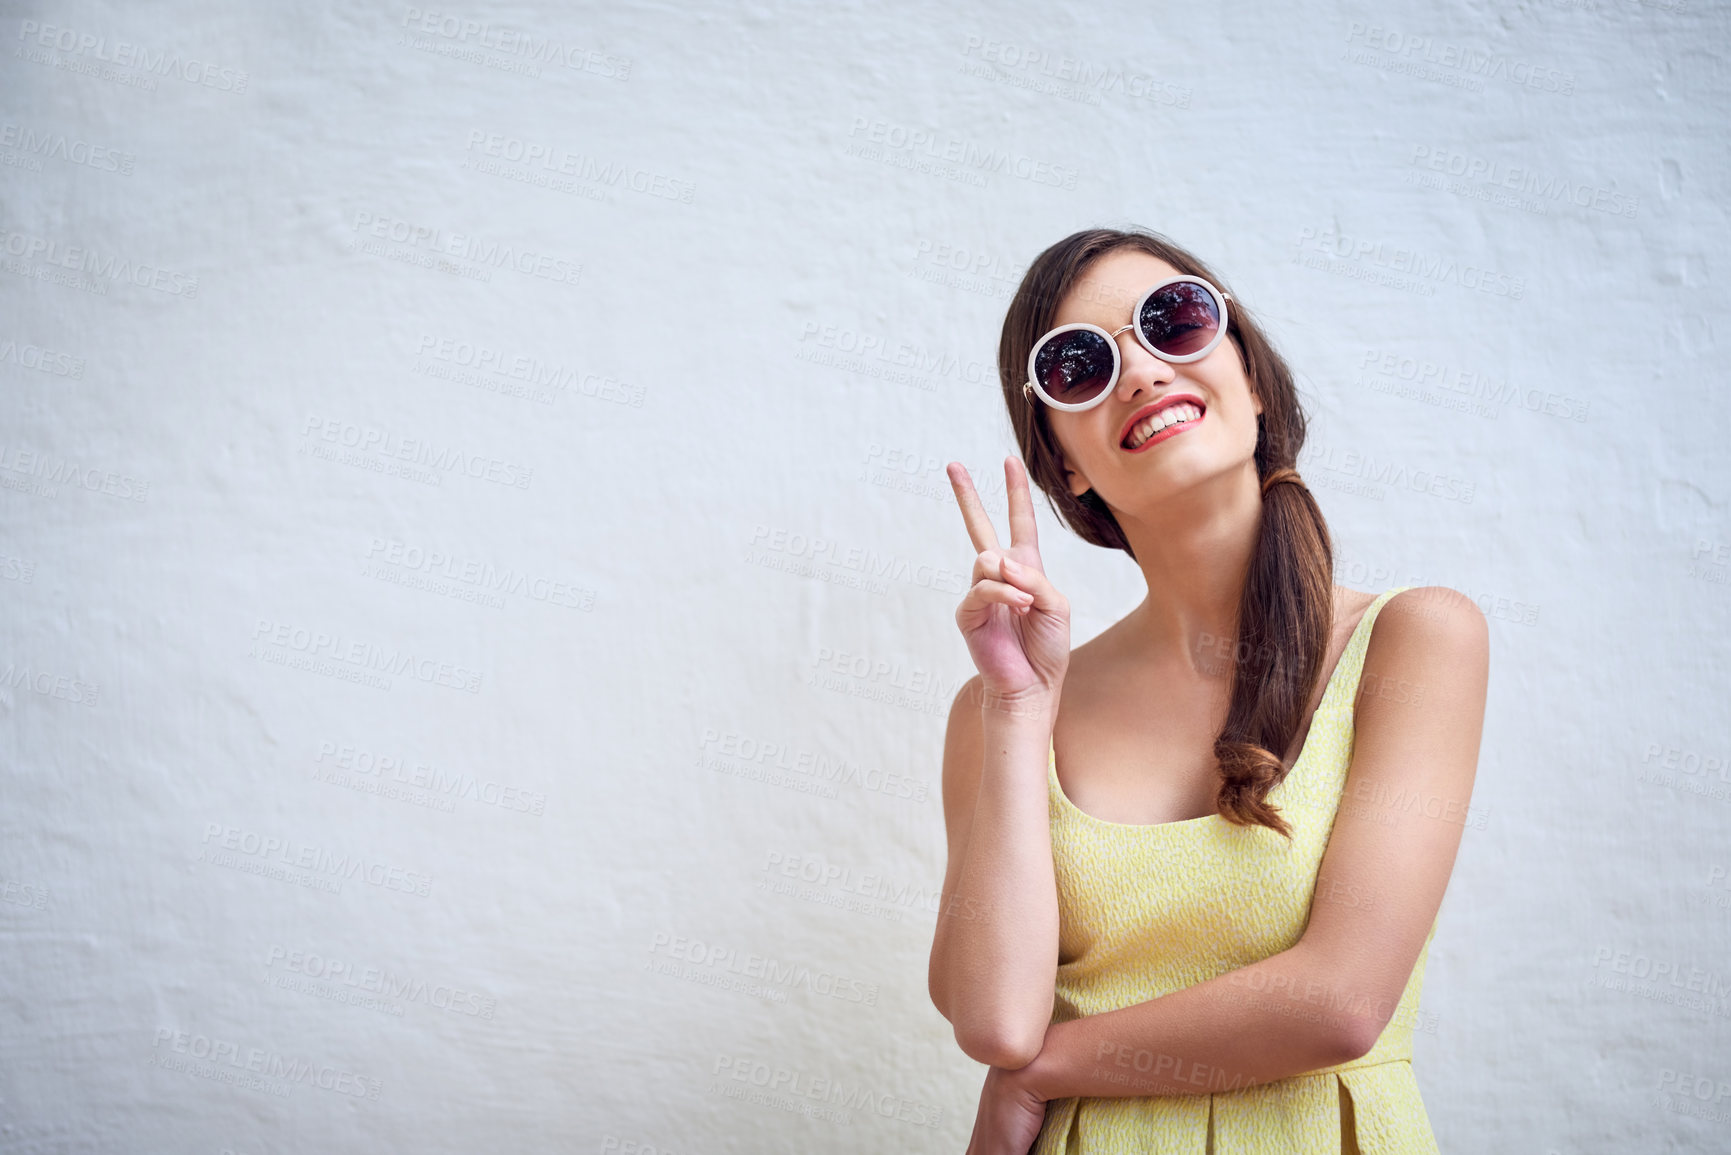 Buy stock photo Studio portrait of a cheerful young woman wearing sunglasses while showing a peace sign against a grey background